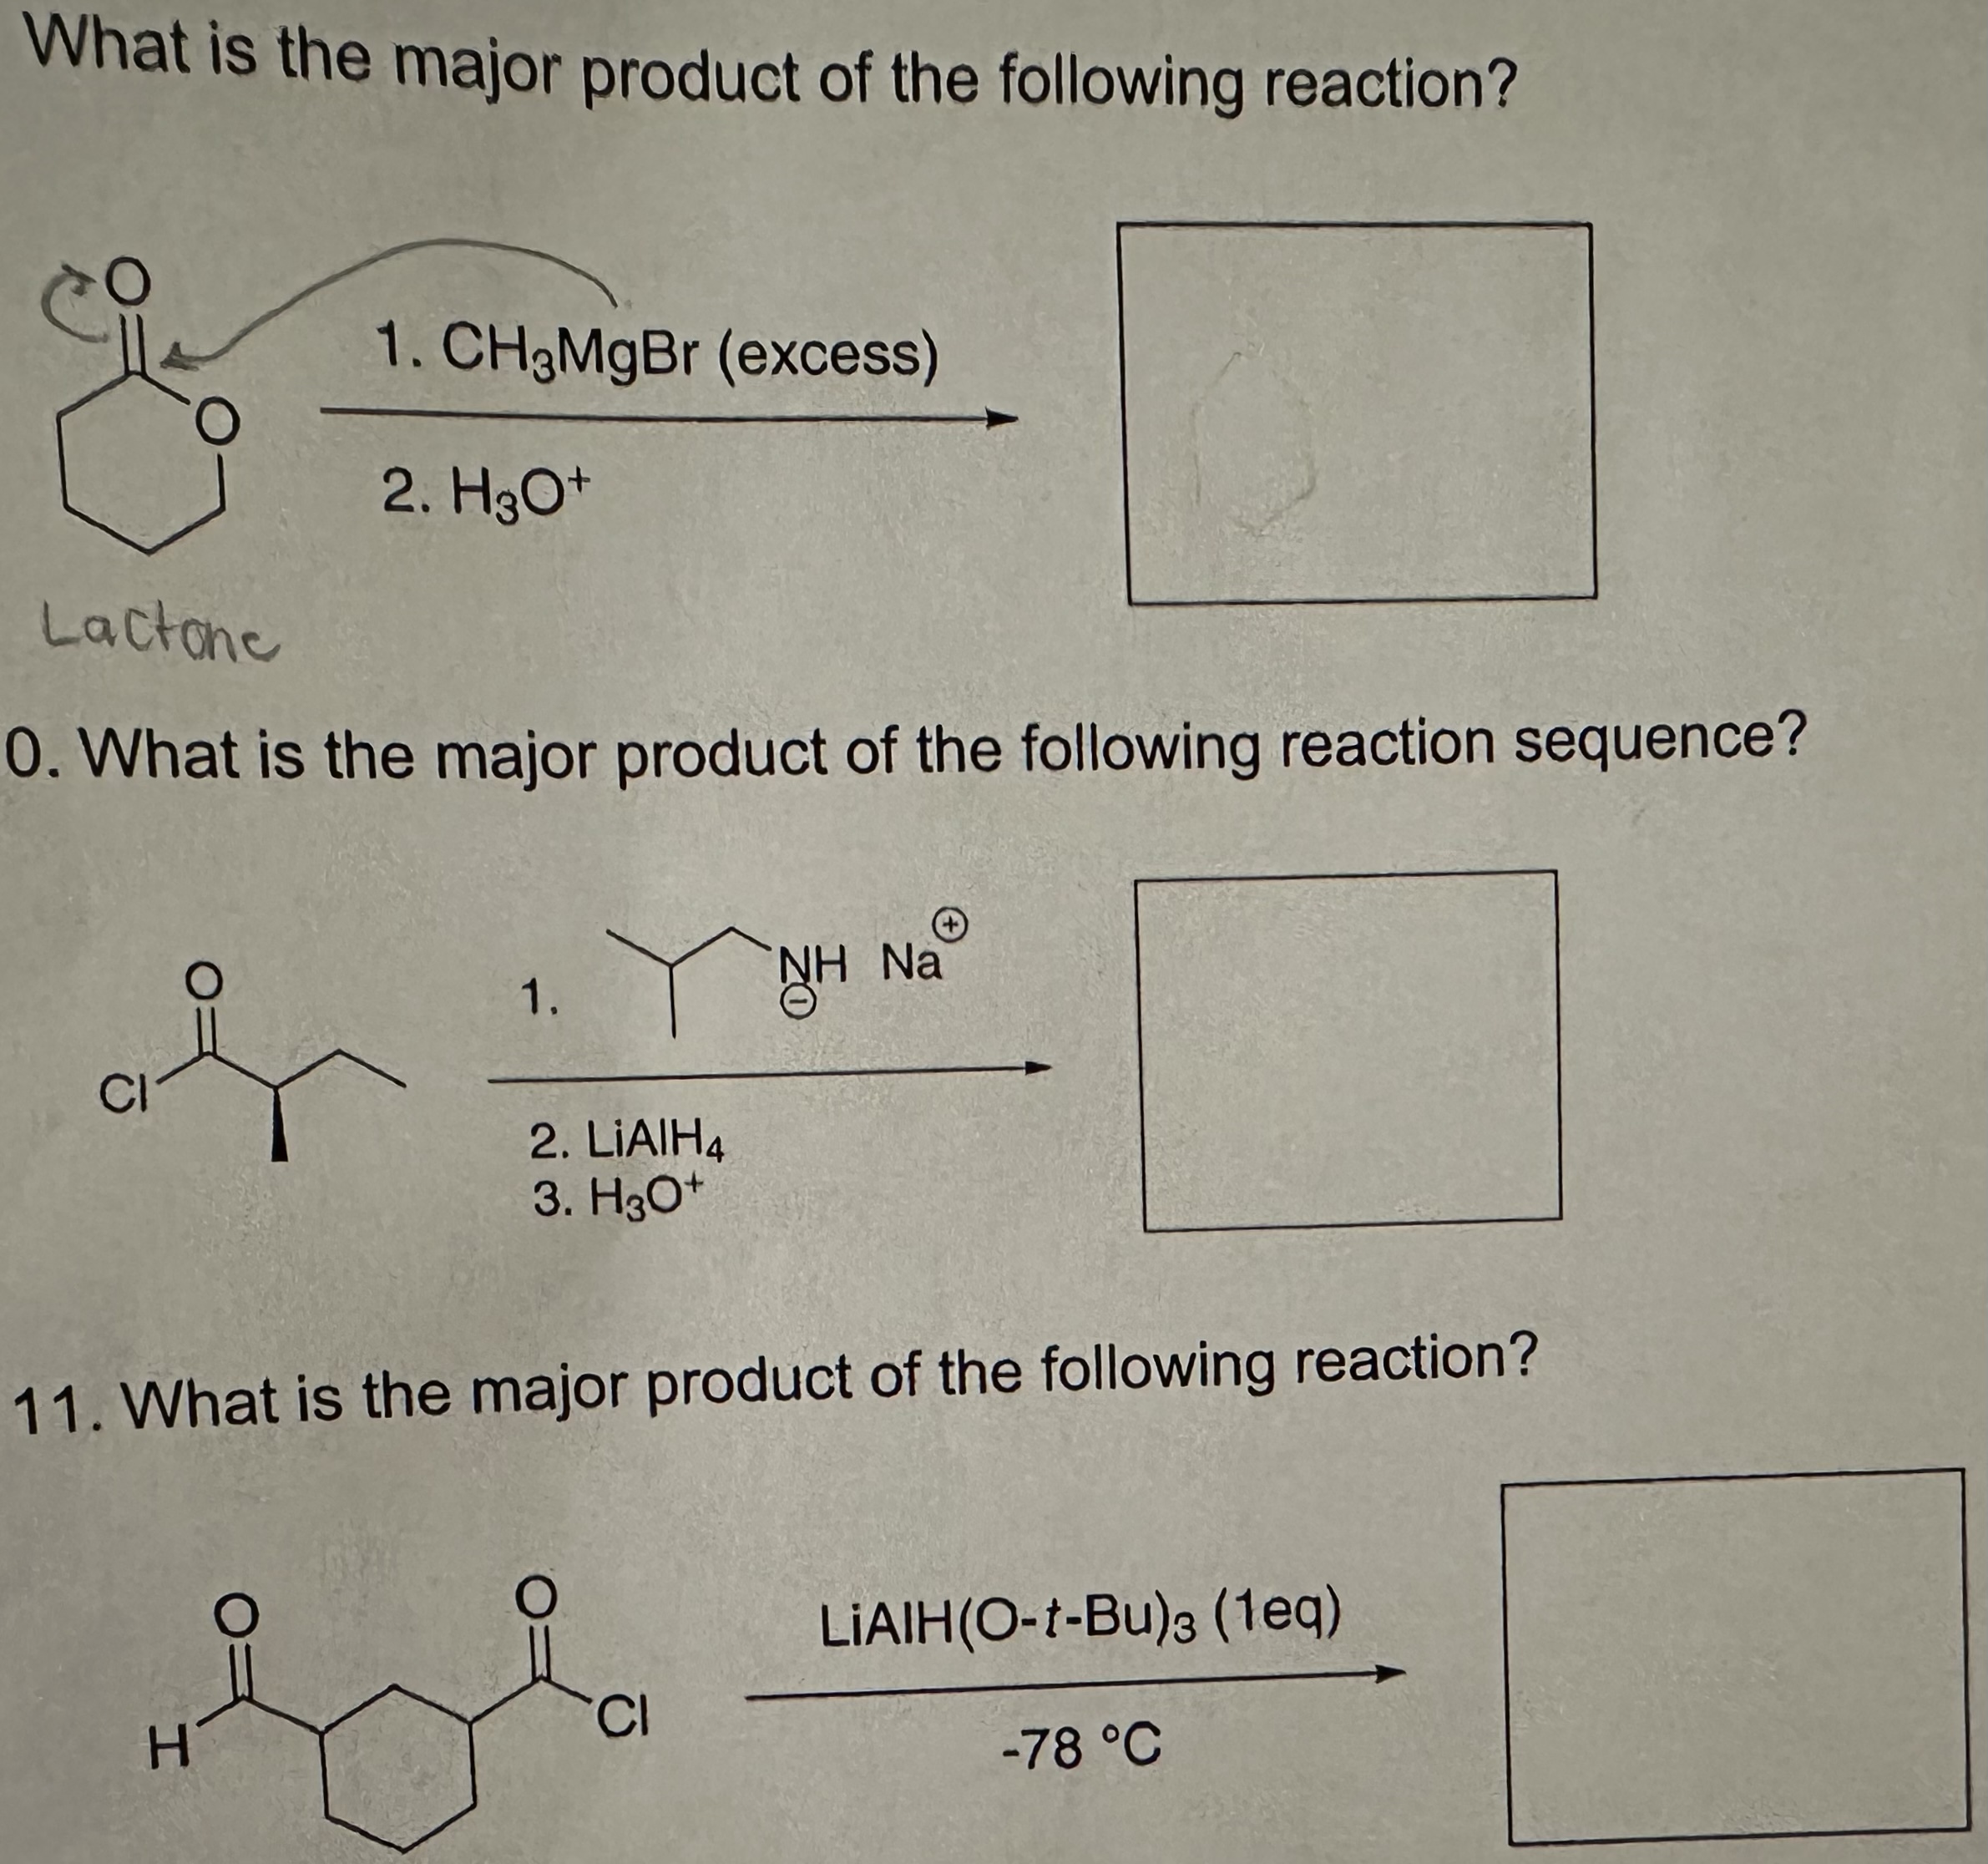 What is the major product of the following reaction?
Lactone
What is the major product of the following reaction sequence?
11